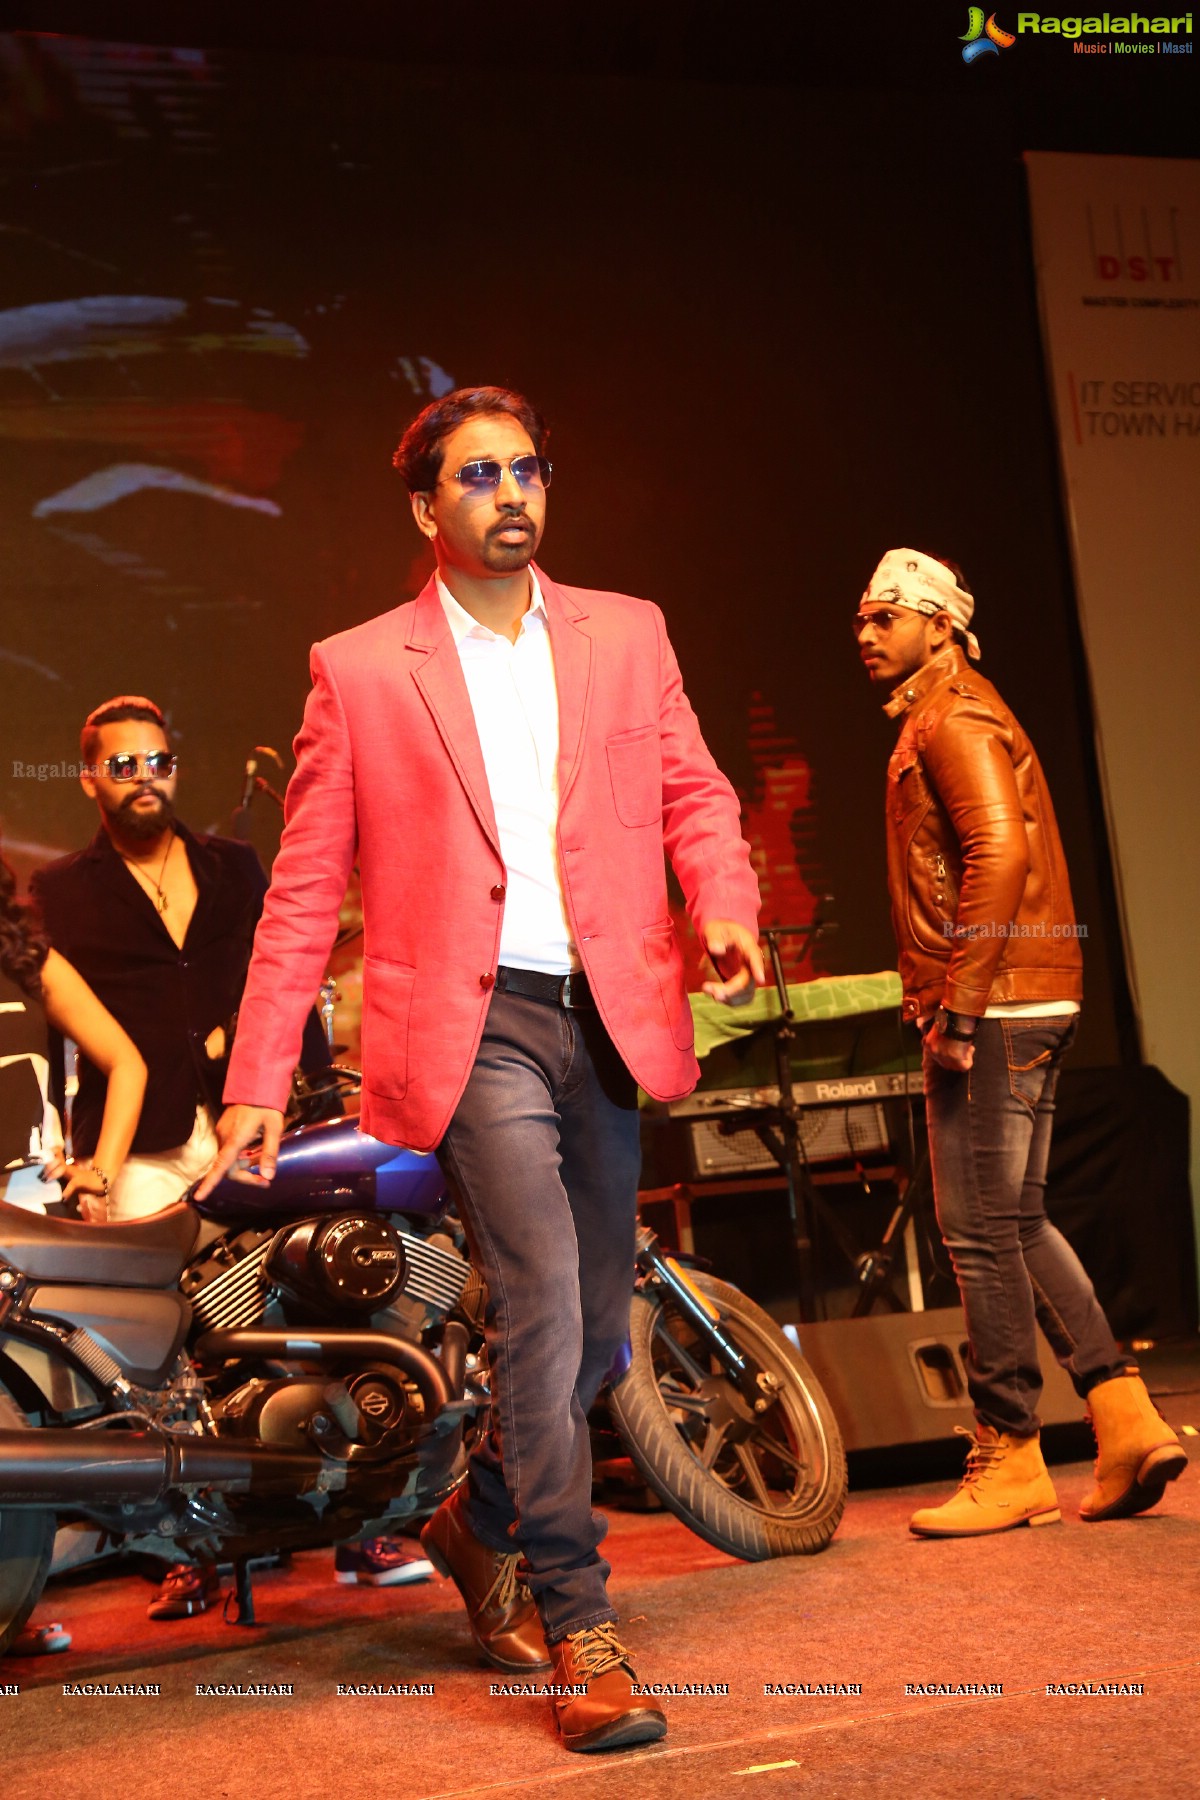 A Fashion Show with a Difference by DST India IT Professionals at HICC, Madhapur, Hyderabad